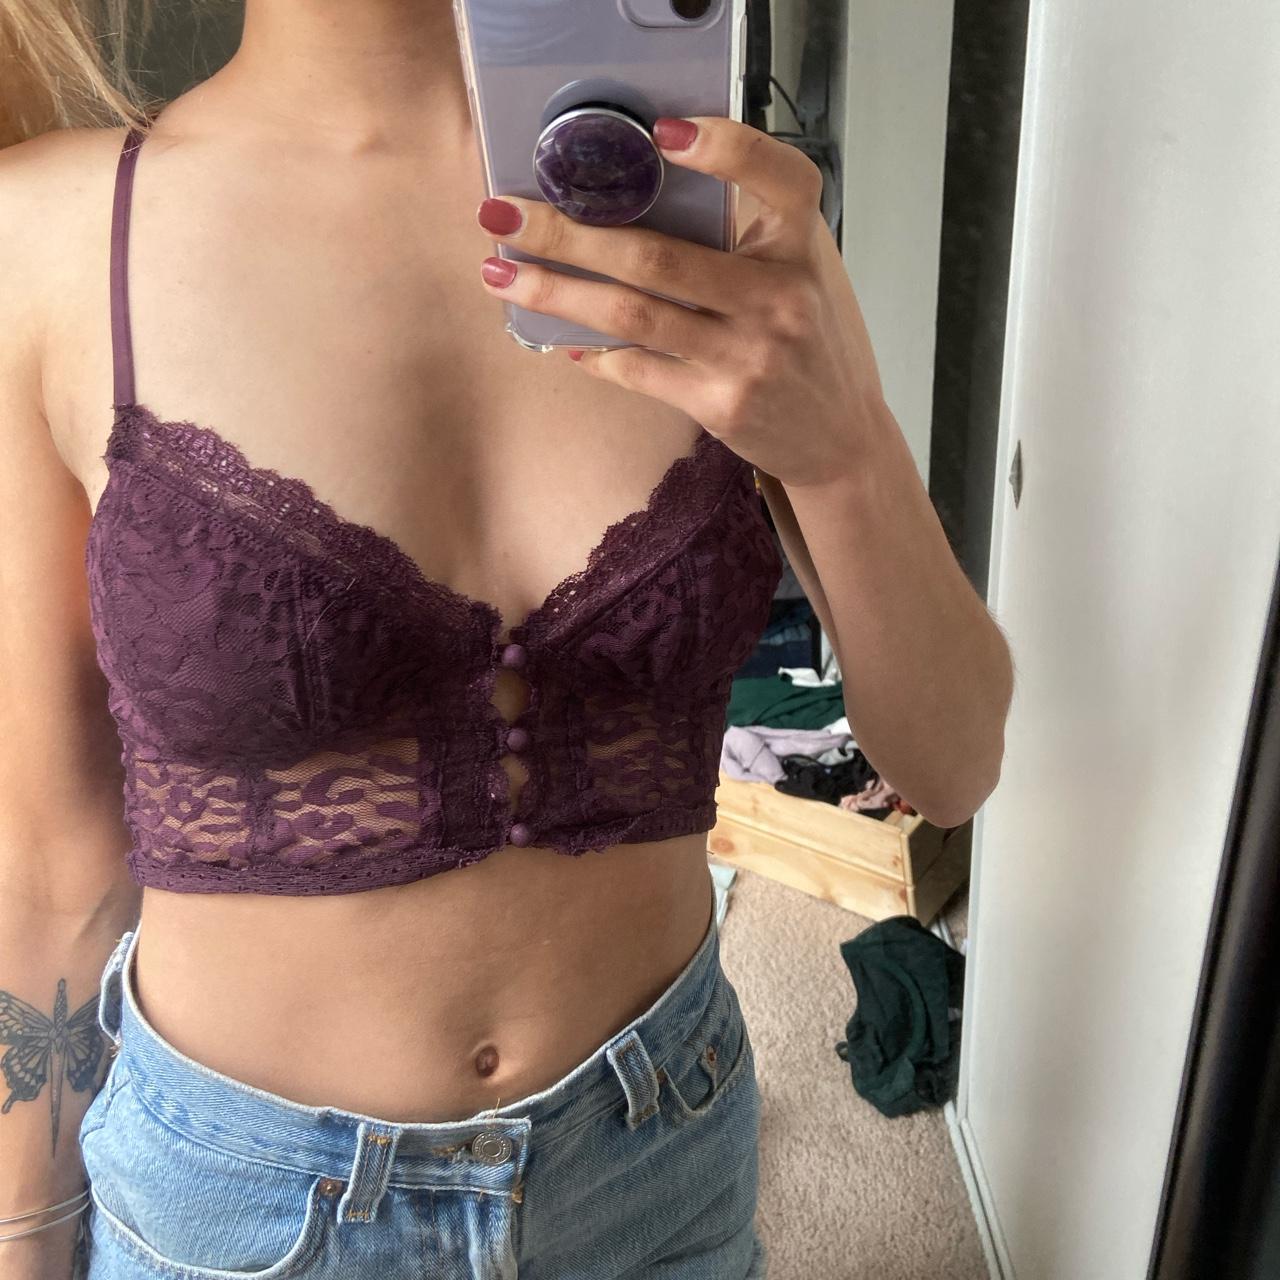 sweet sparkly bralette ! really cute for nights out - Depop